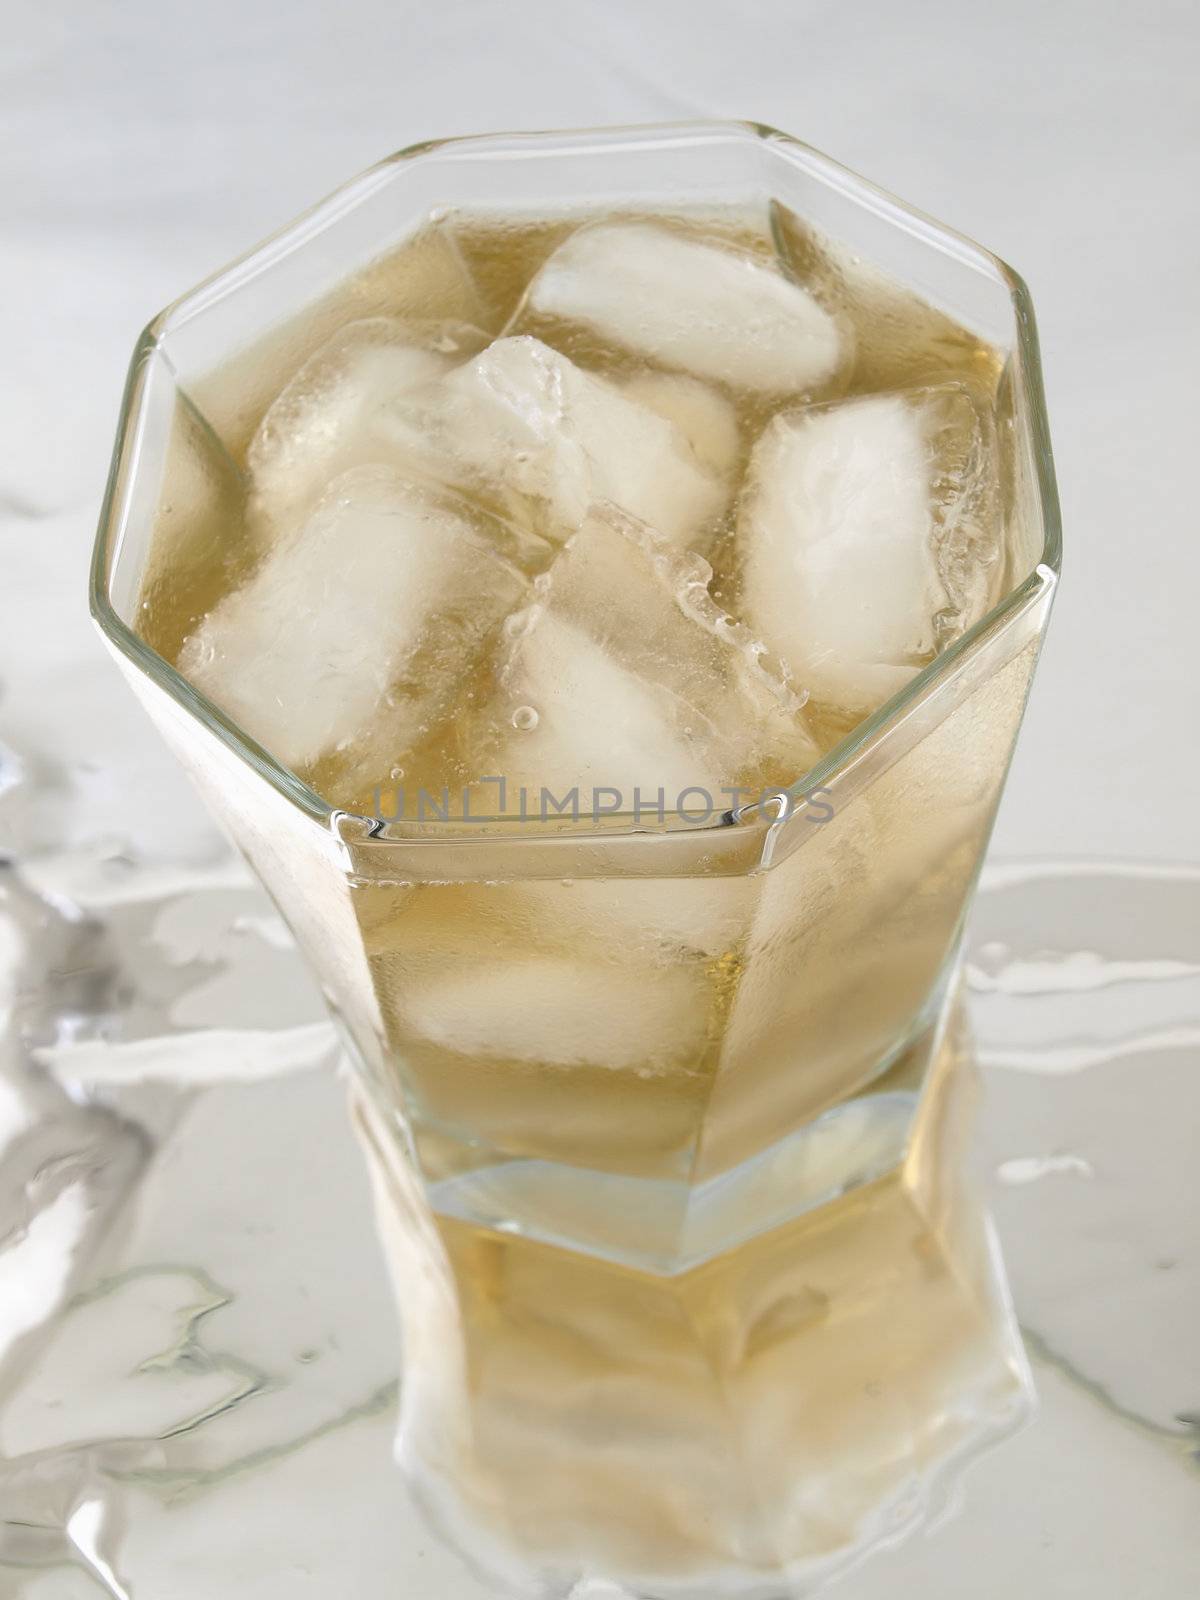 A glass of Alcohol with ice floating in a glass isolated on a  reflective surface